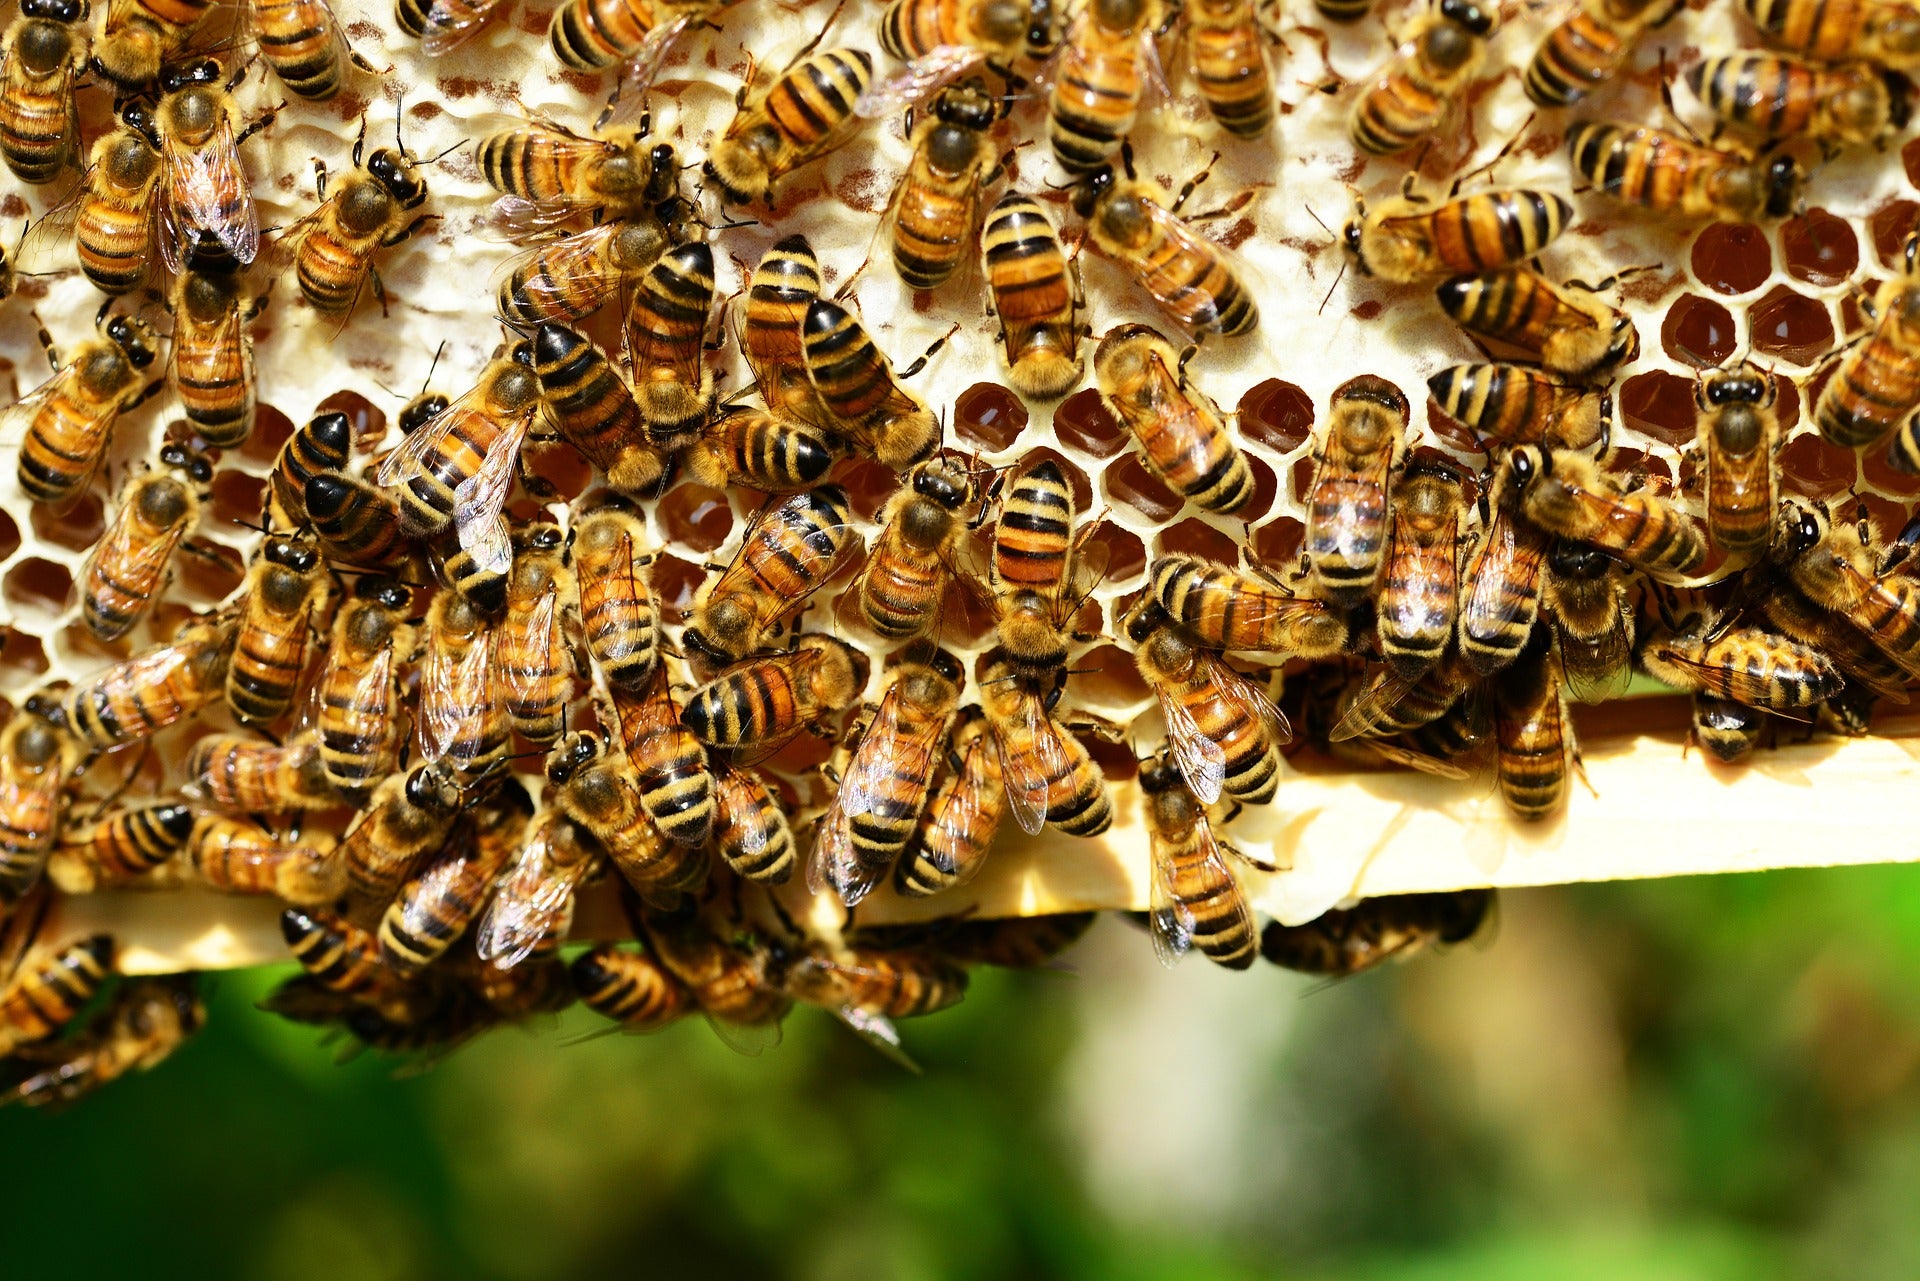 Busy bees on their honeycomb.&nbsp;